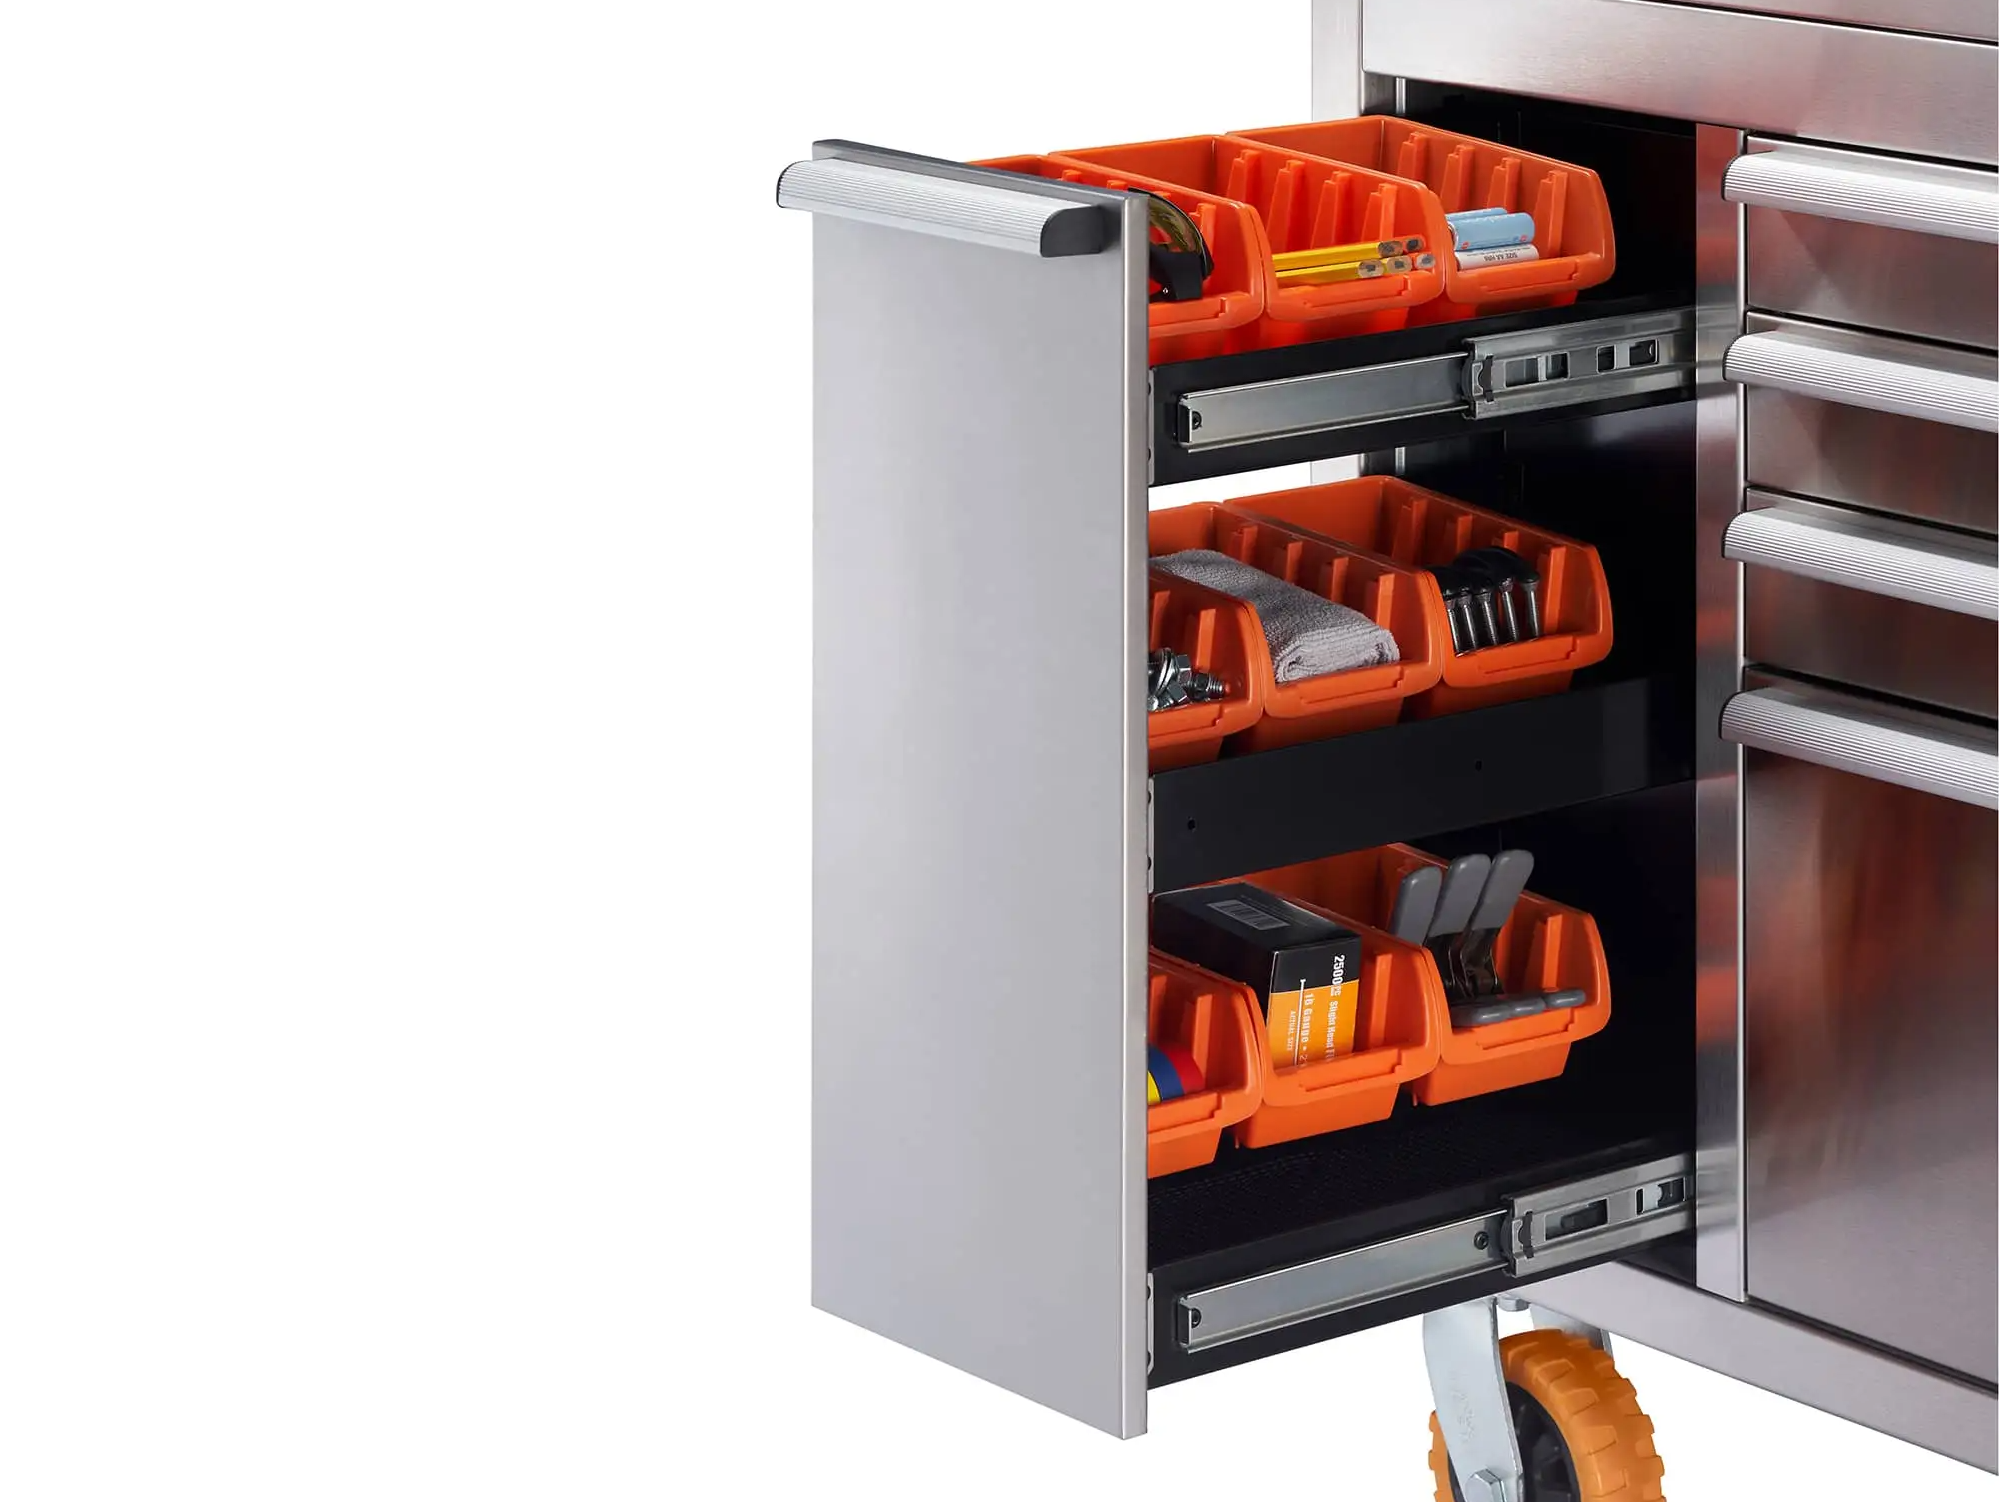 full height drawer, open, filled with 9 small orange bins